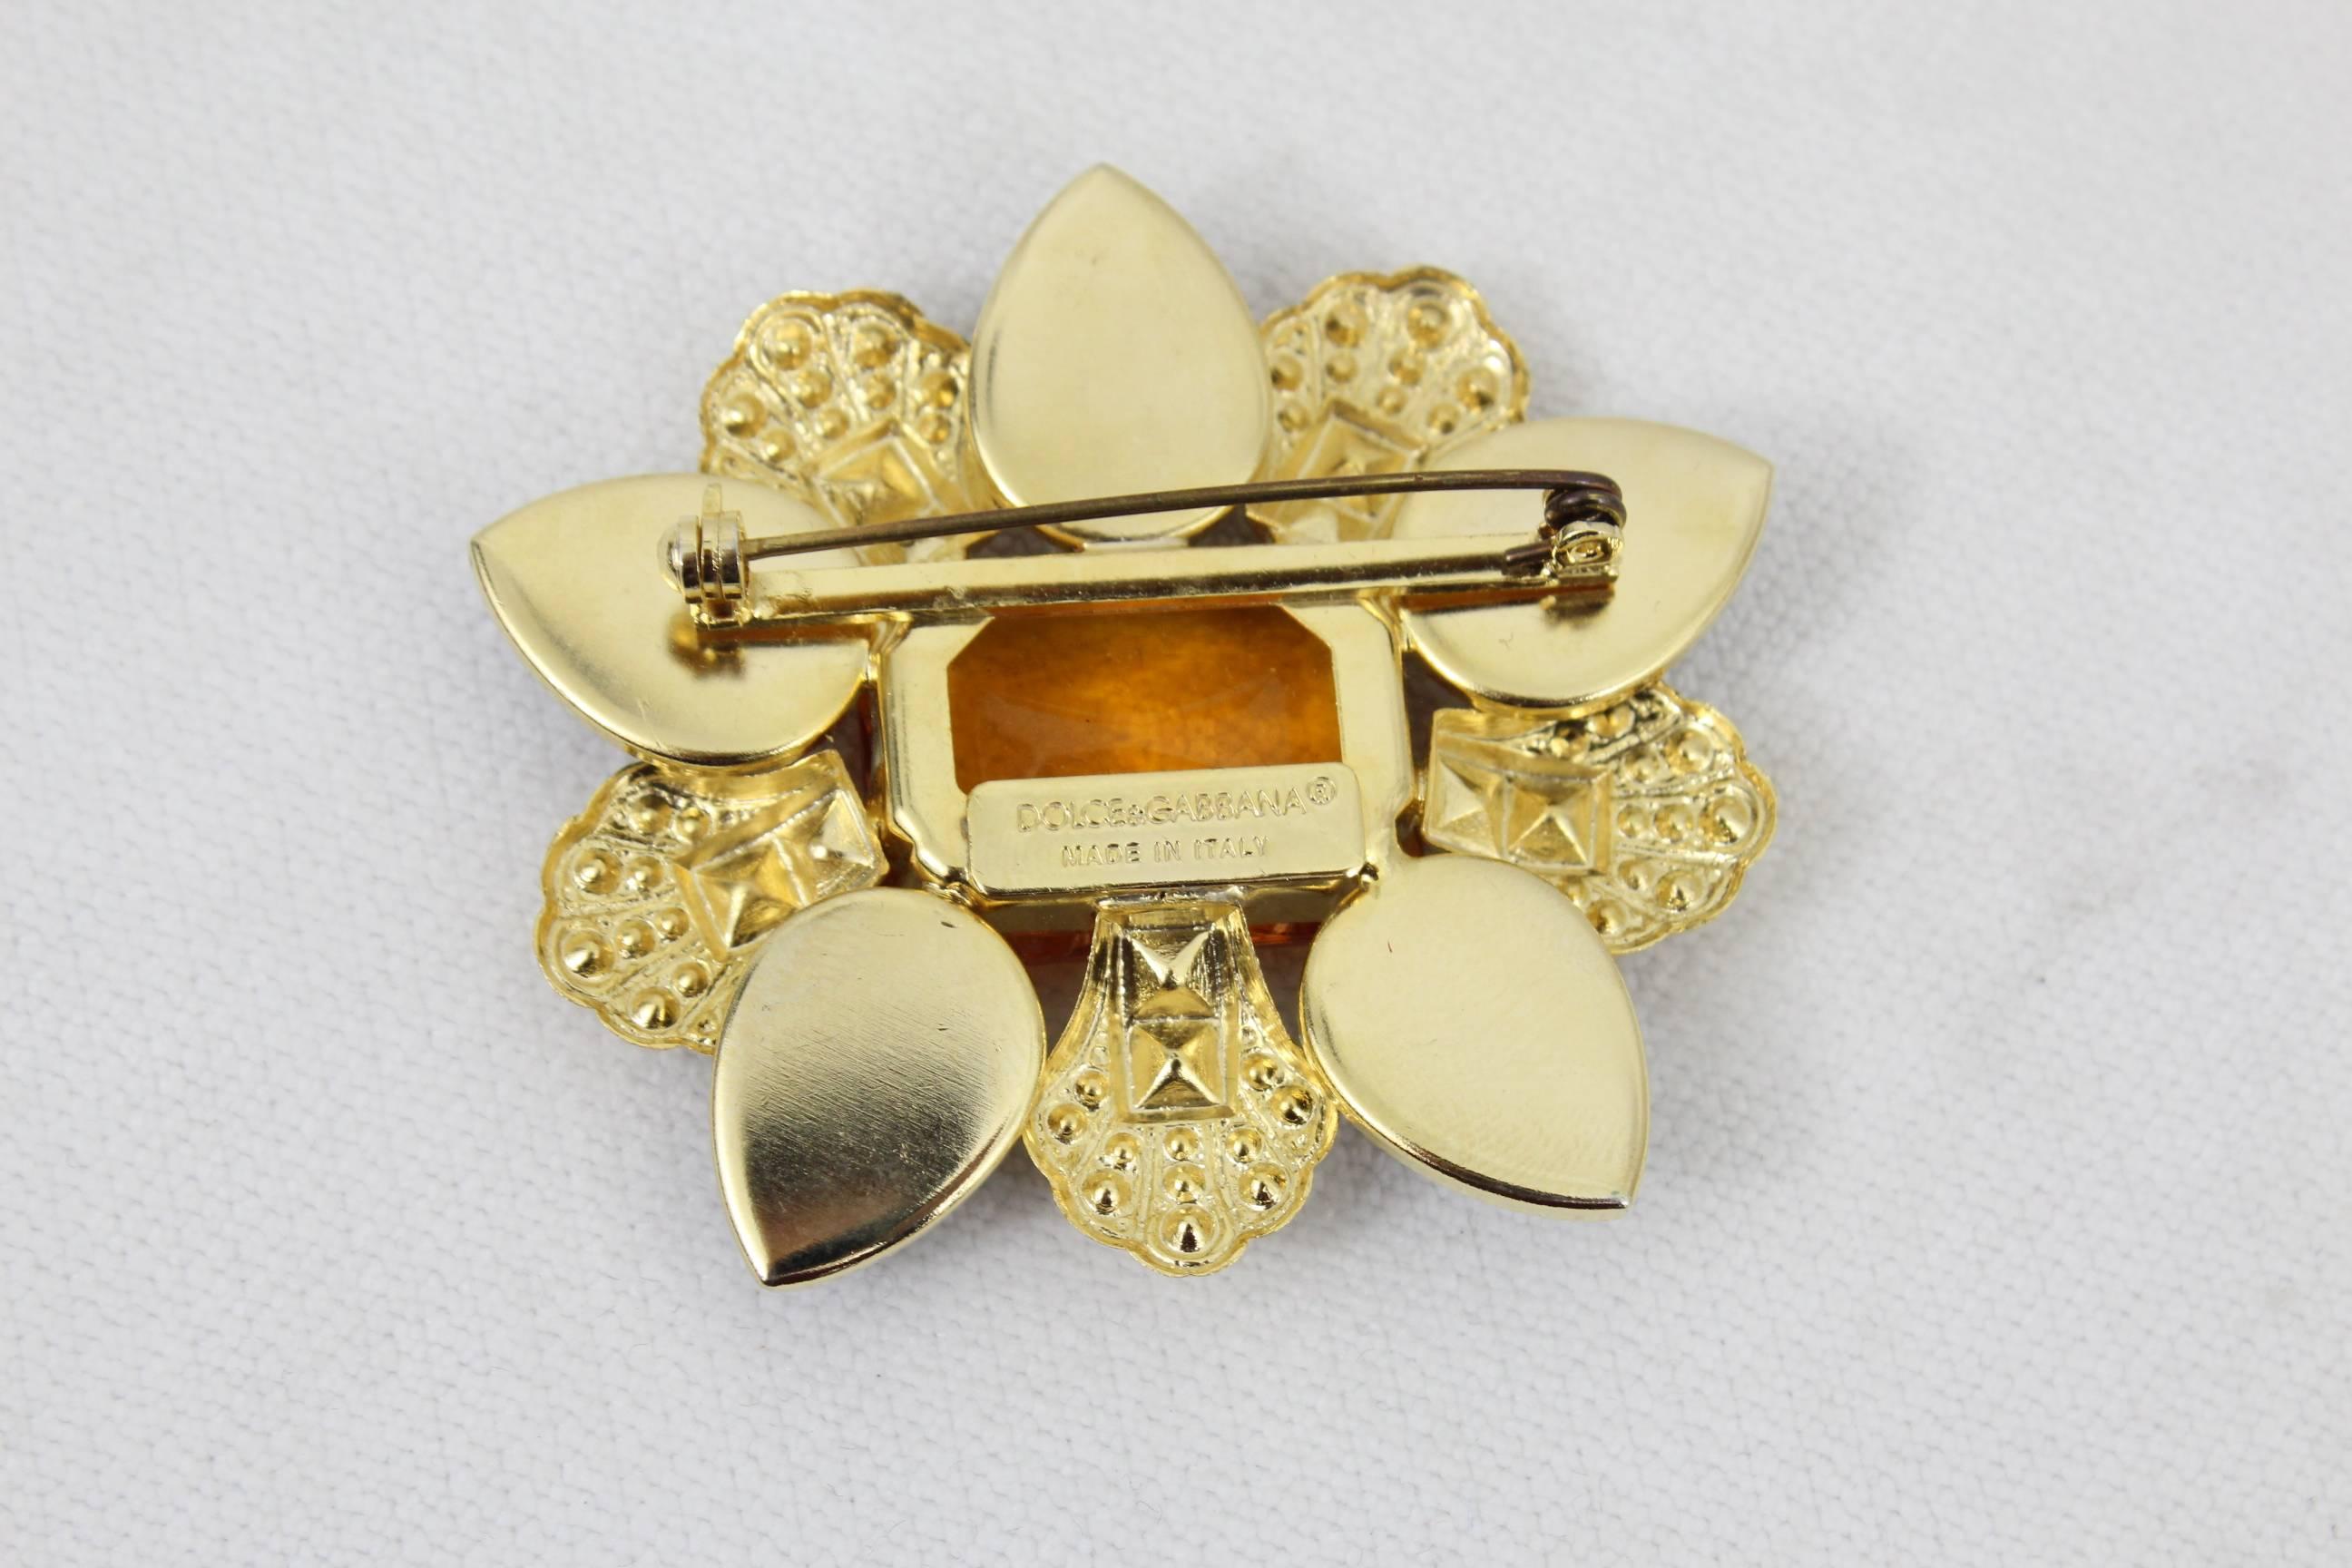 Nice brooche for men fom Dolce Gabanna in golden steel and stones. eally nice to complete your look